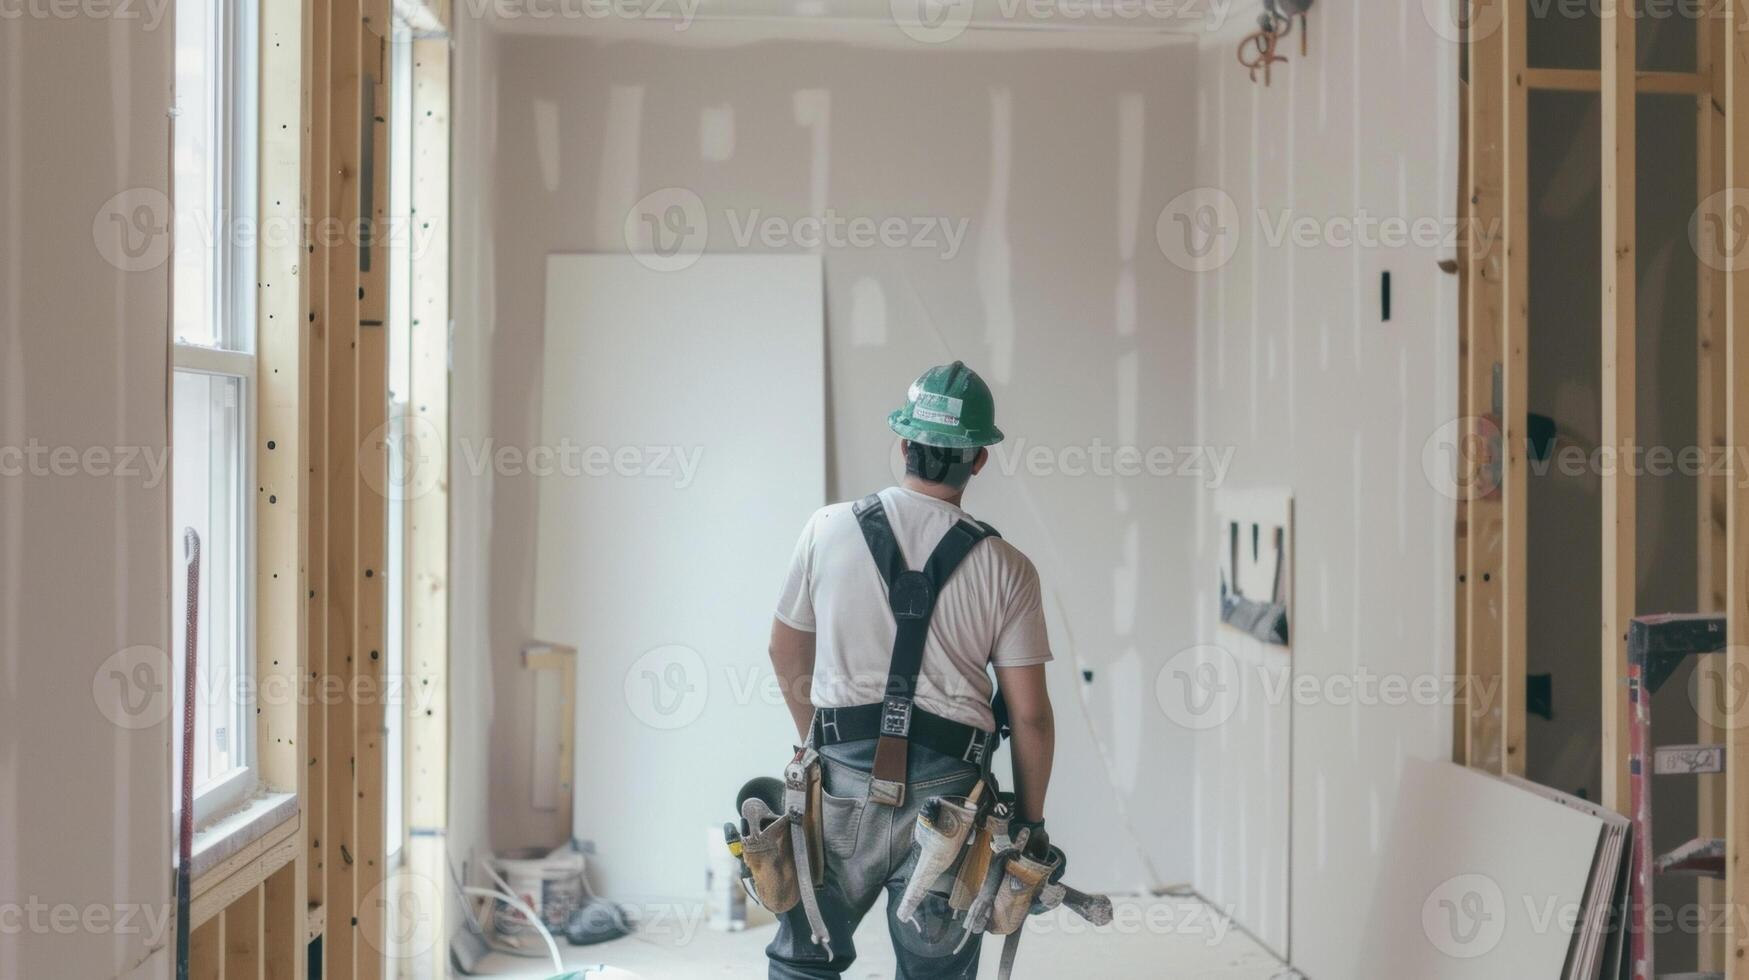 Working efficiently and with precision the drywall installers expertly install new panels and flawlessly blend them into existing walls for a seamless finish in a home offic photo